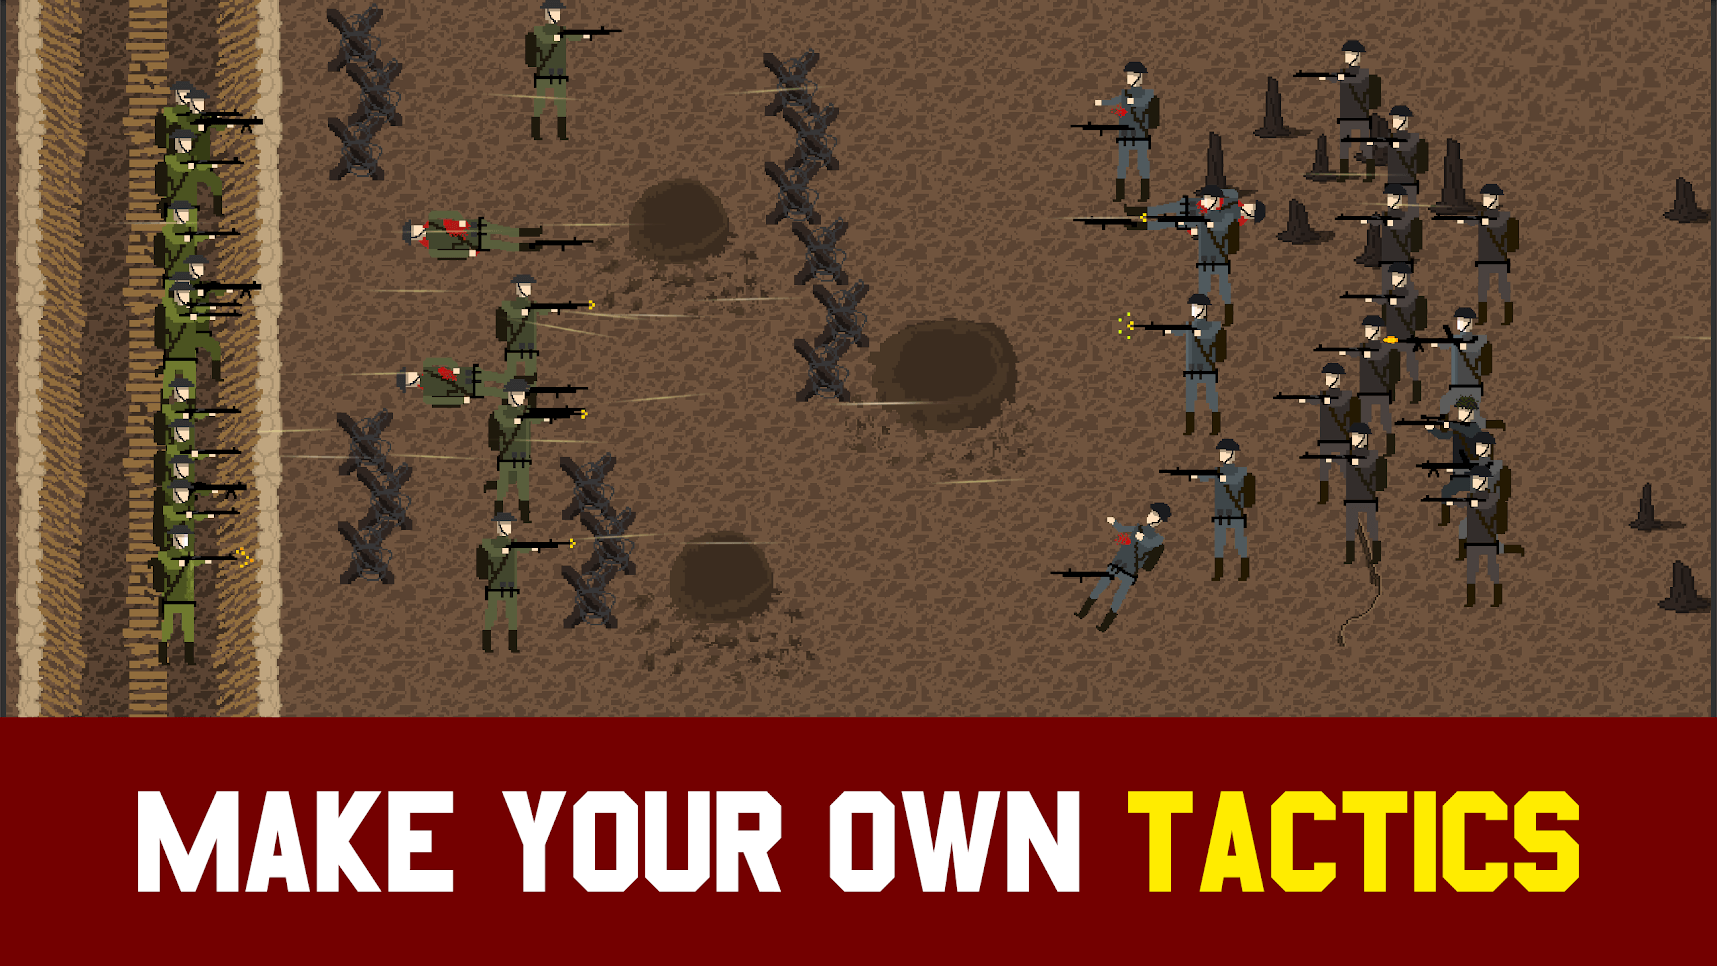 Trench-Warfare-1917-WW1-Strategy-Game-7.png